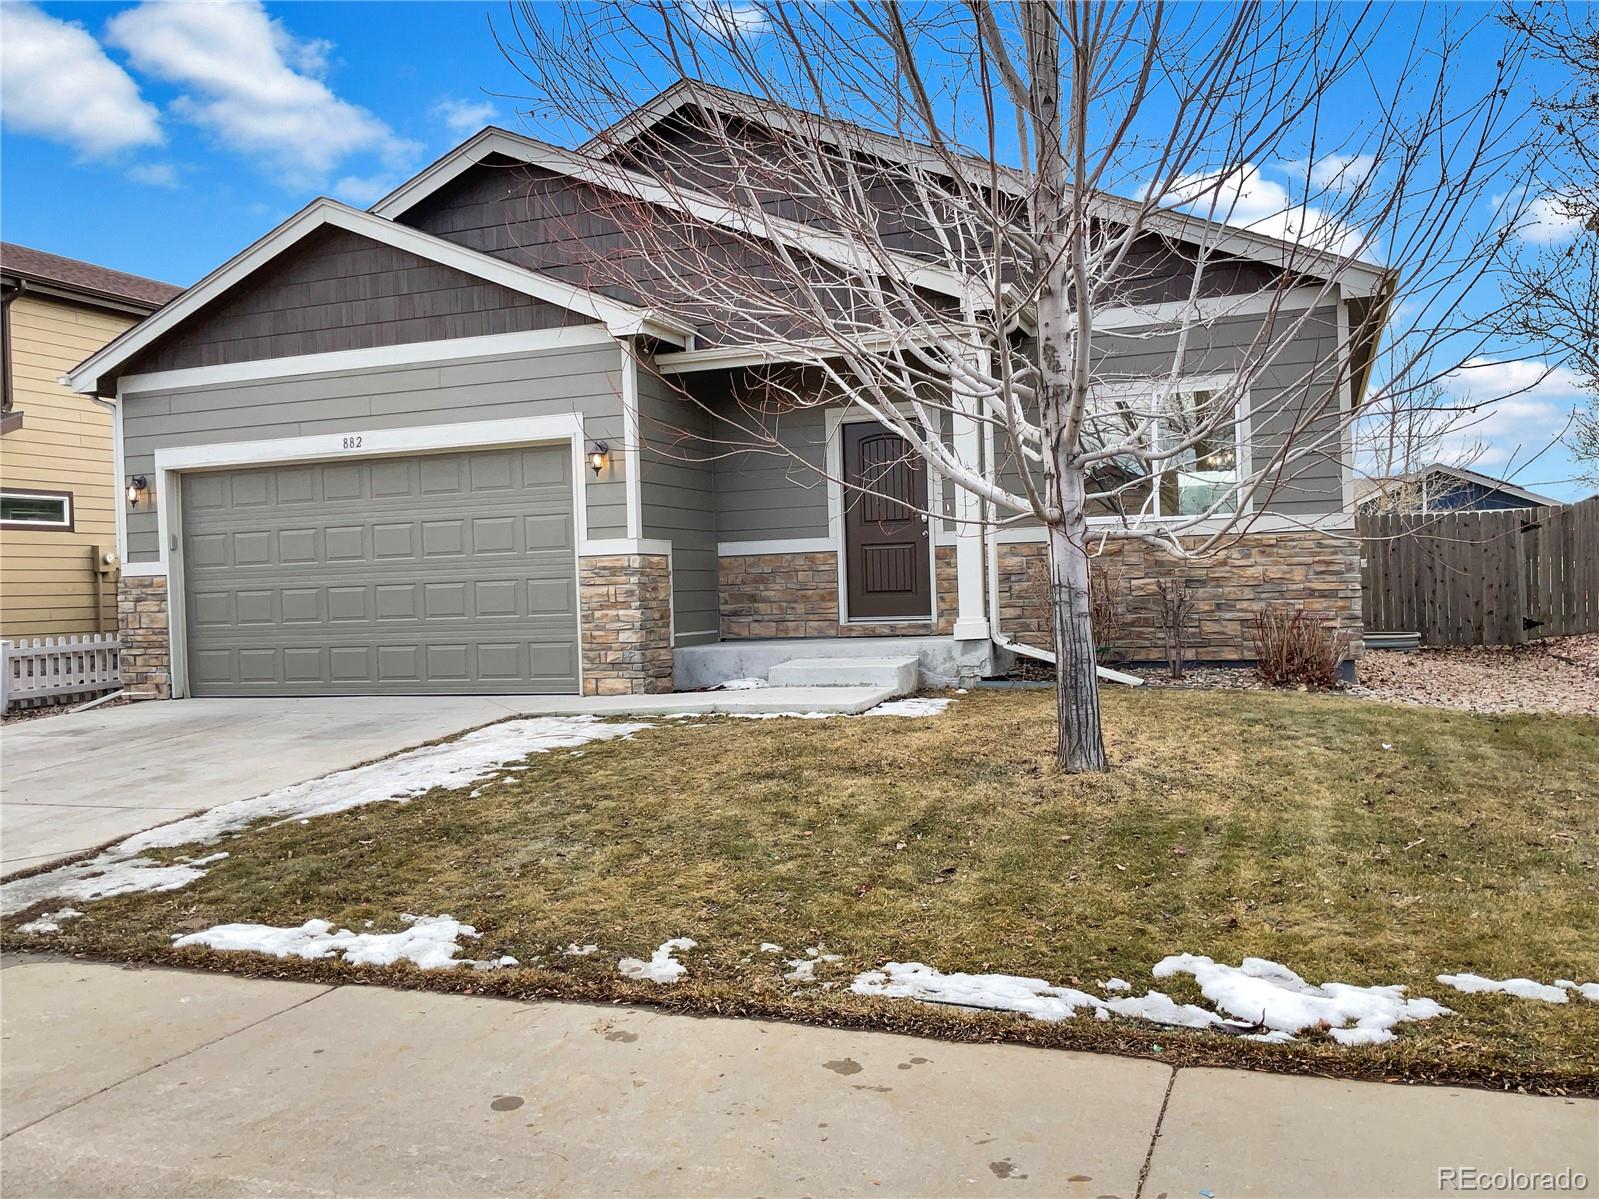 Report Image for 882 S Carriage Drive,Milliken, Colorado